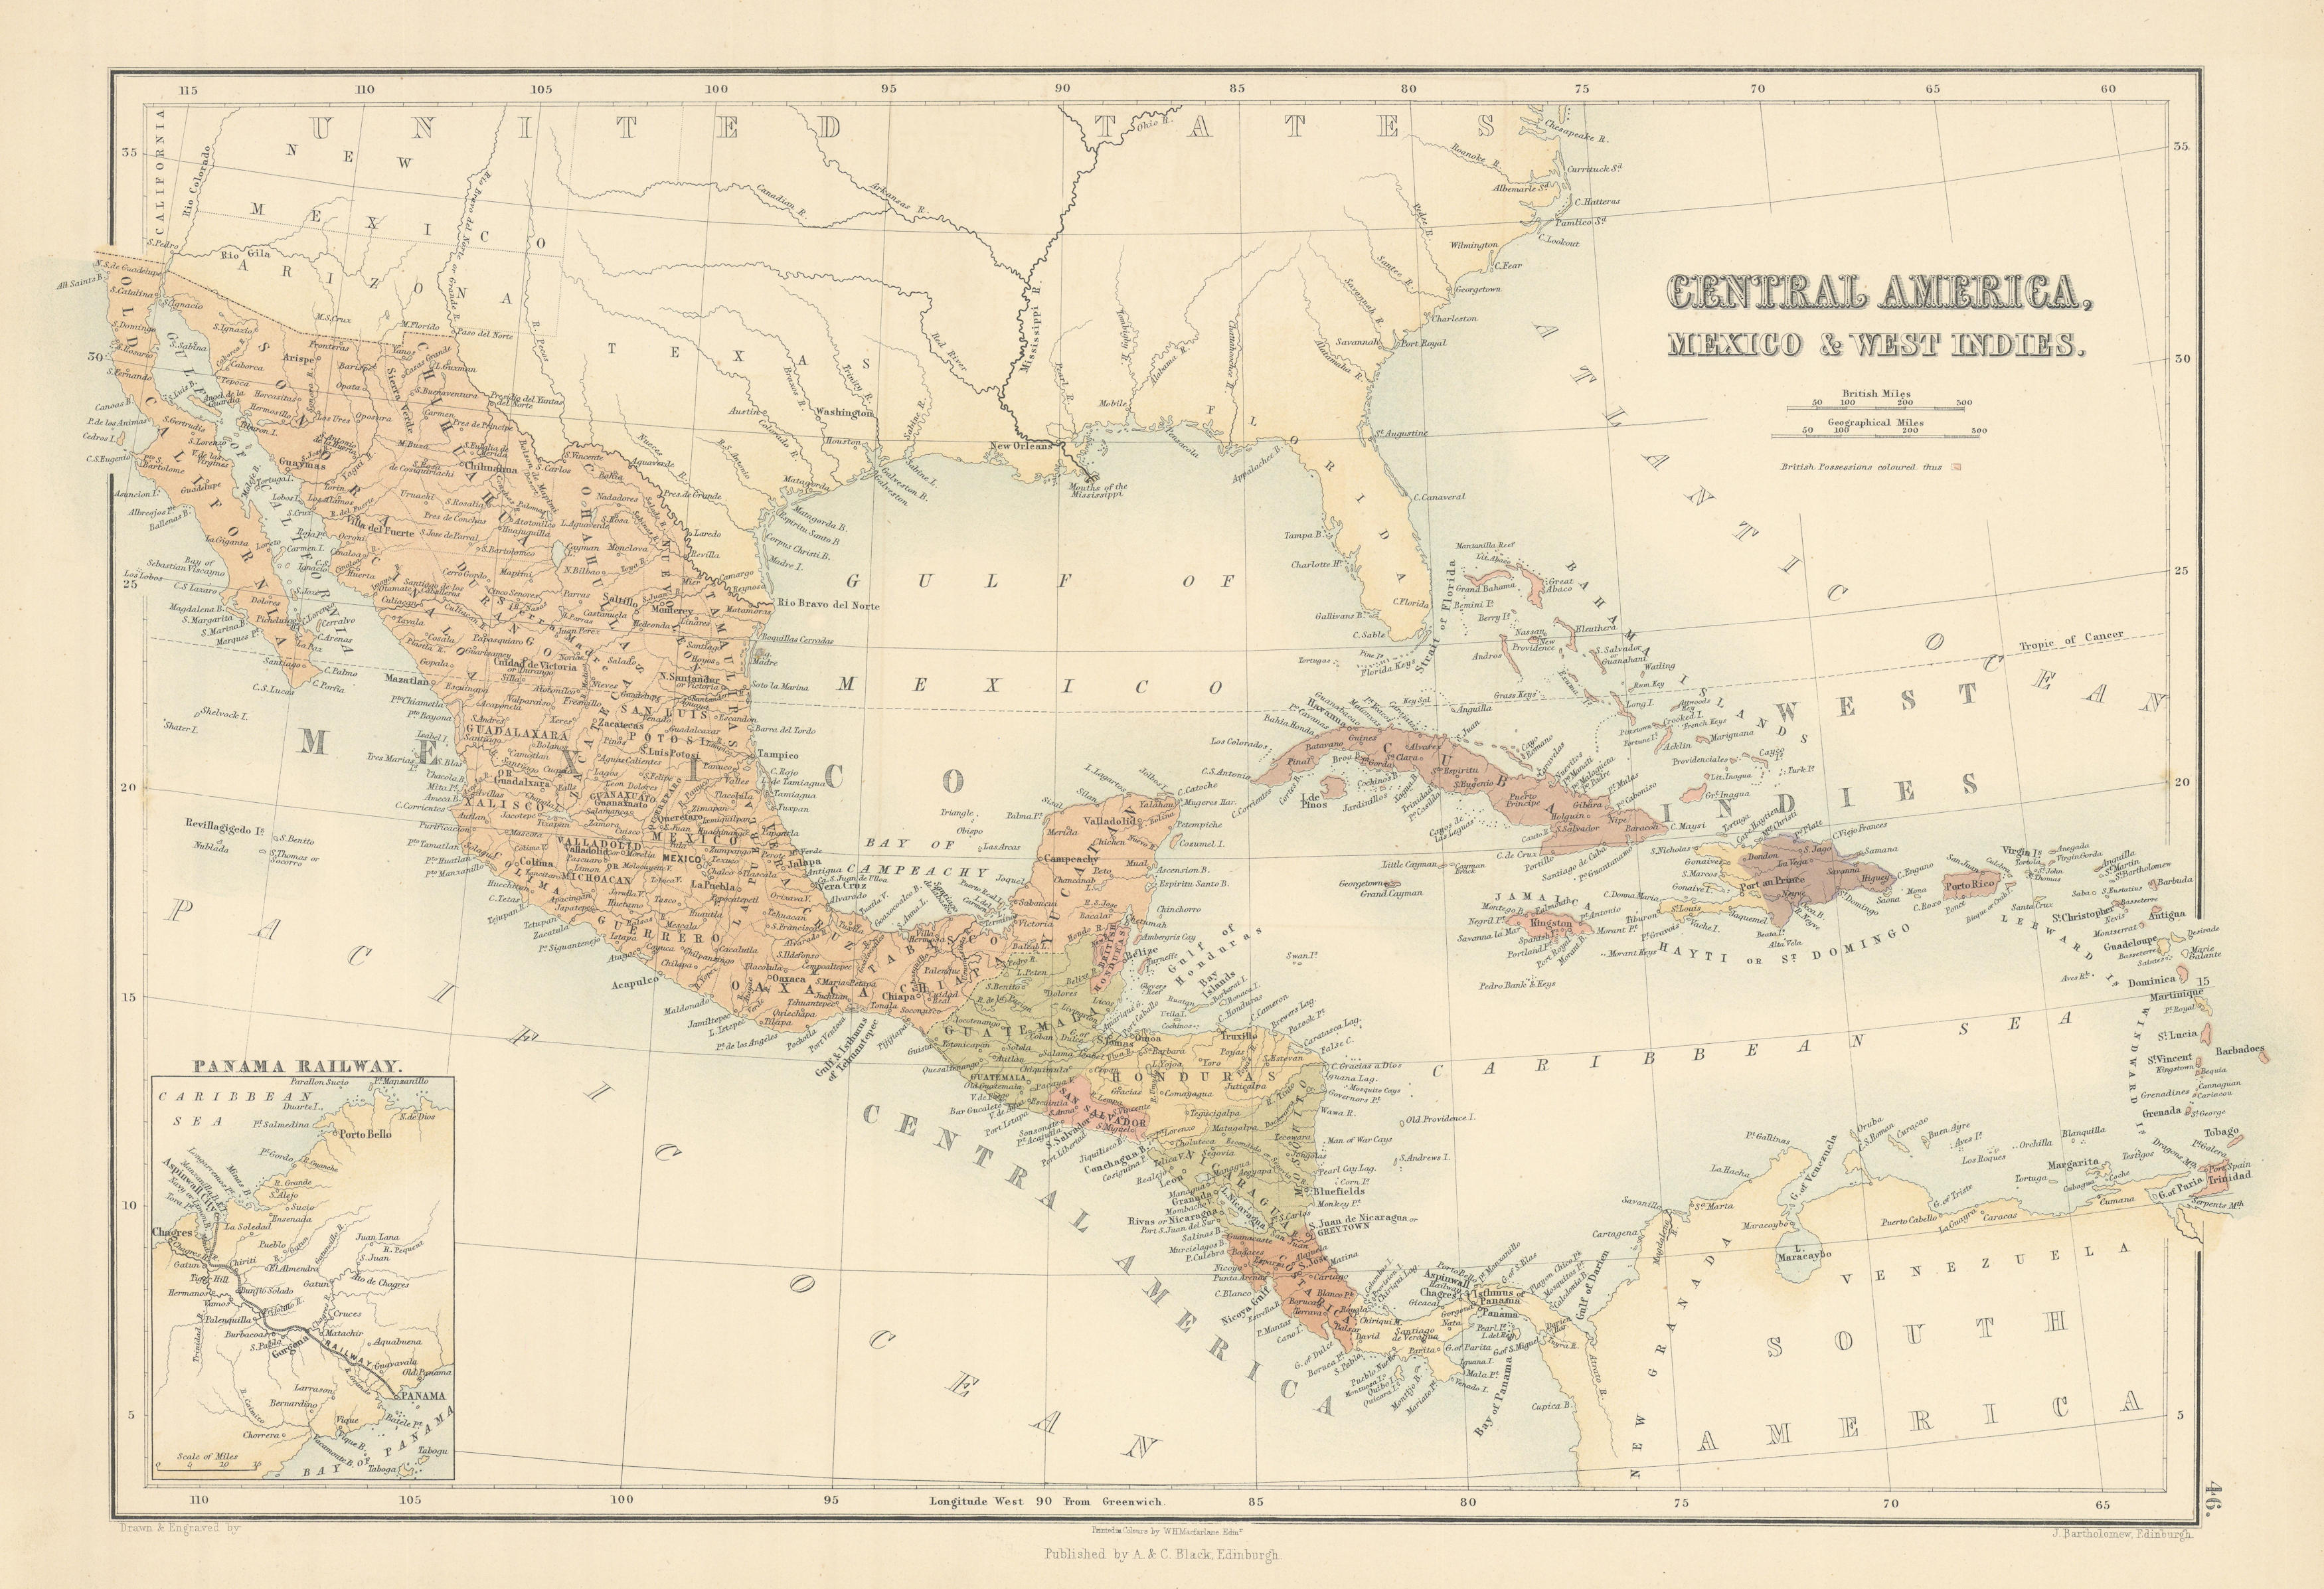 Associate Product Central America, Mexico & West Indies. Panama Railway. BARTHOLOMEW 1862 map